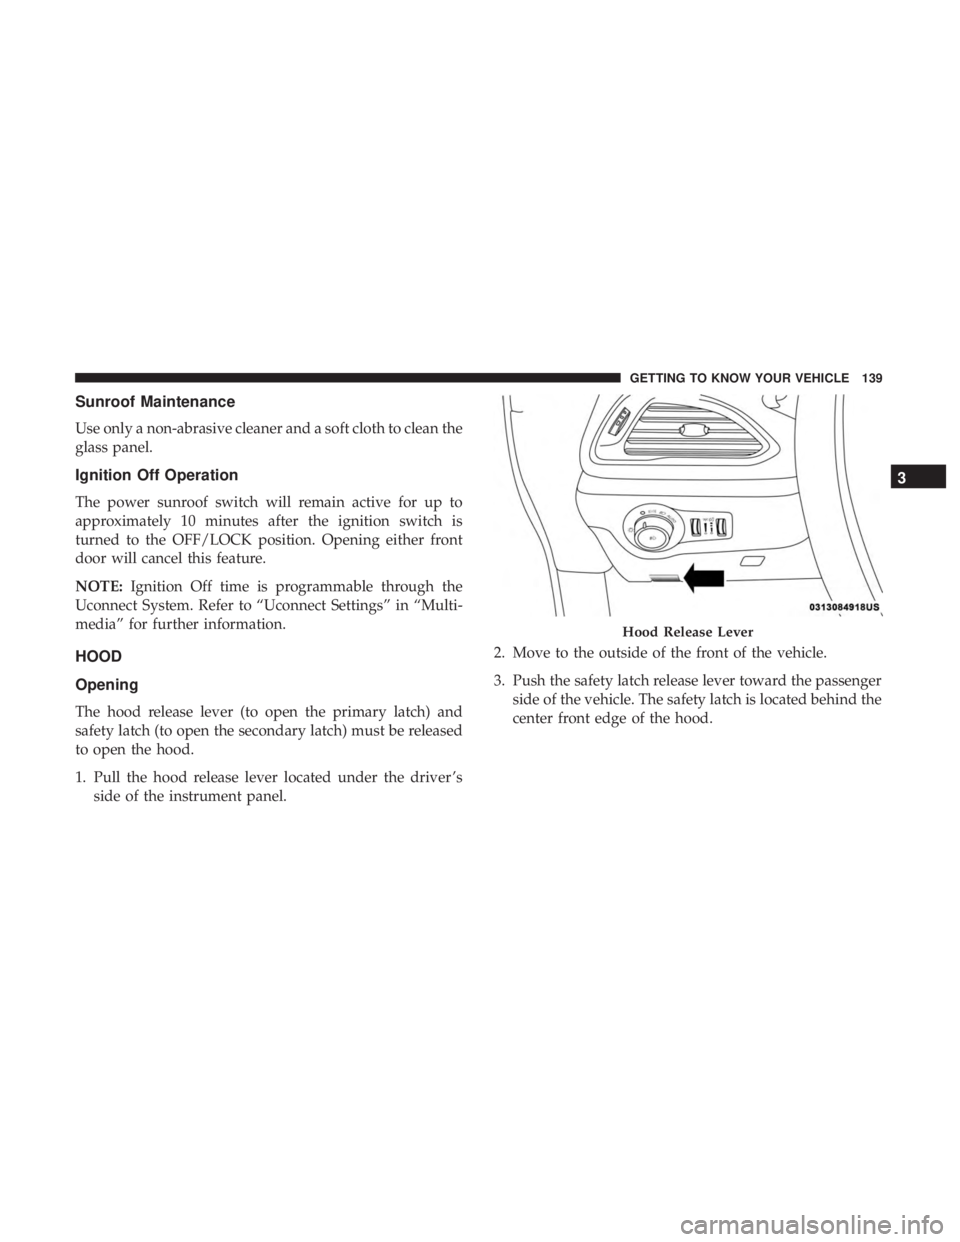 CHRYSLER PACIFICA 2018 Owners Guide Sunroof Maintenance
Use only a non-abrasive cleaner and a soft cloth to clean the
glass panel.
Ignition Off Operation
The power sunroof switch will remain active for up to
approximately 10 minutes aft